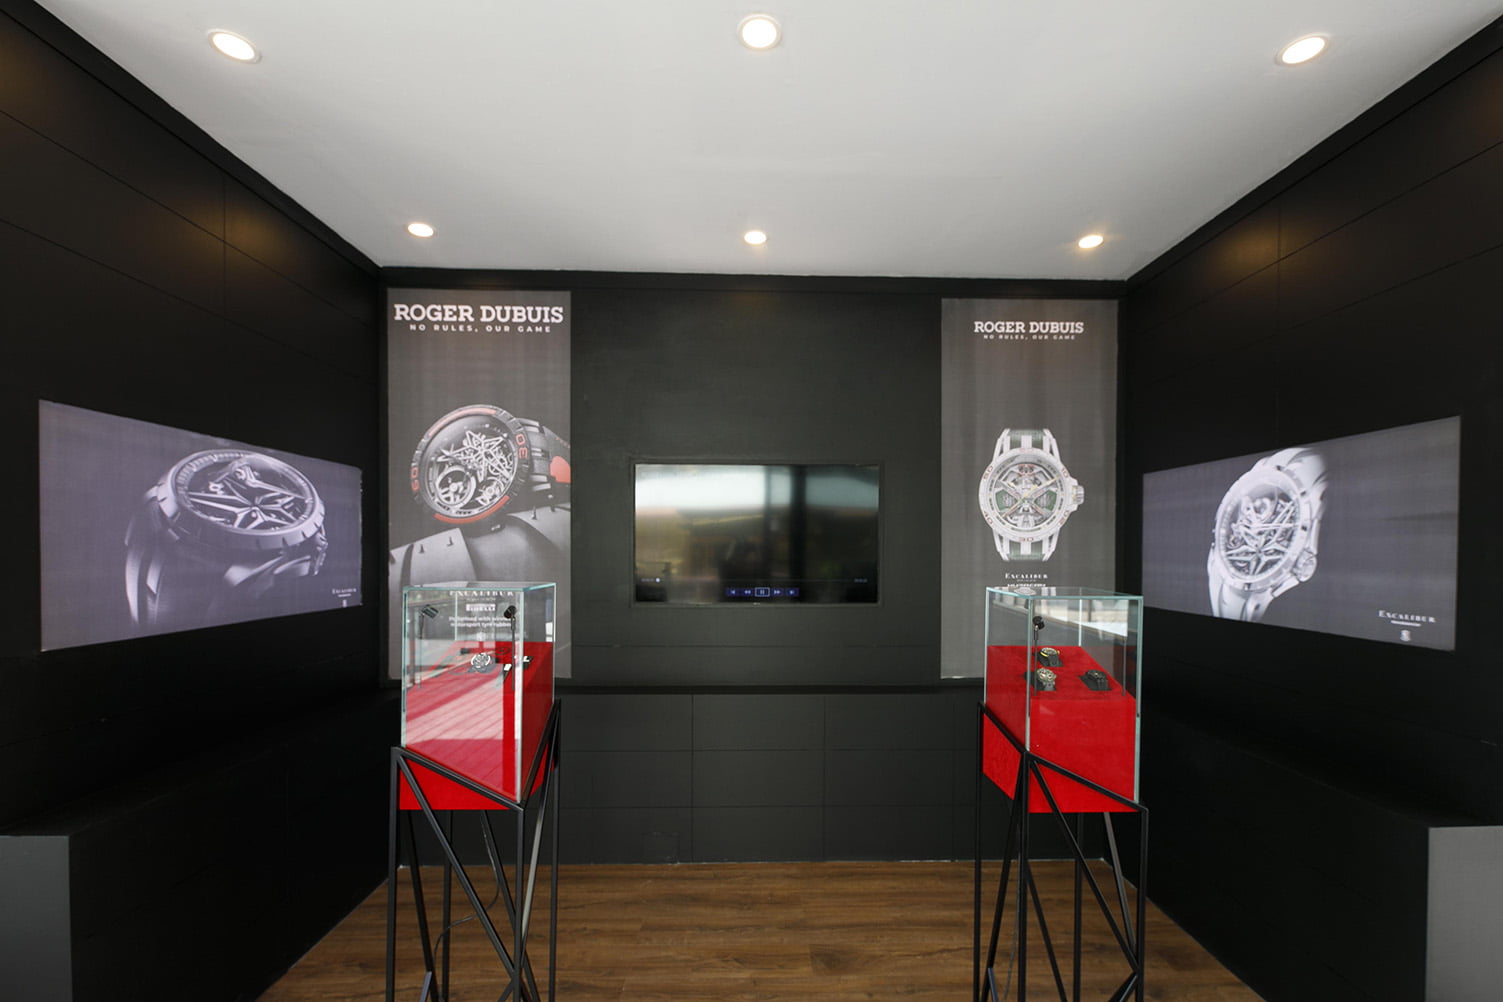 World of Roger Dubuis at Lamborghini’s floating pop-up Lounge in Doha